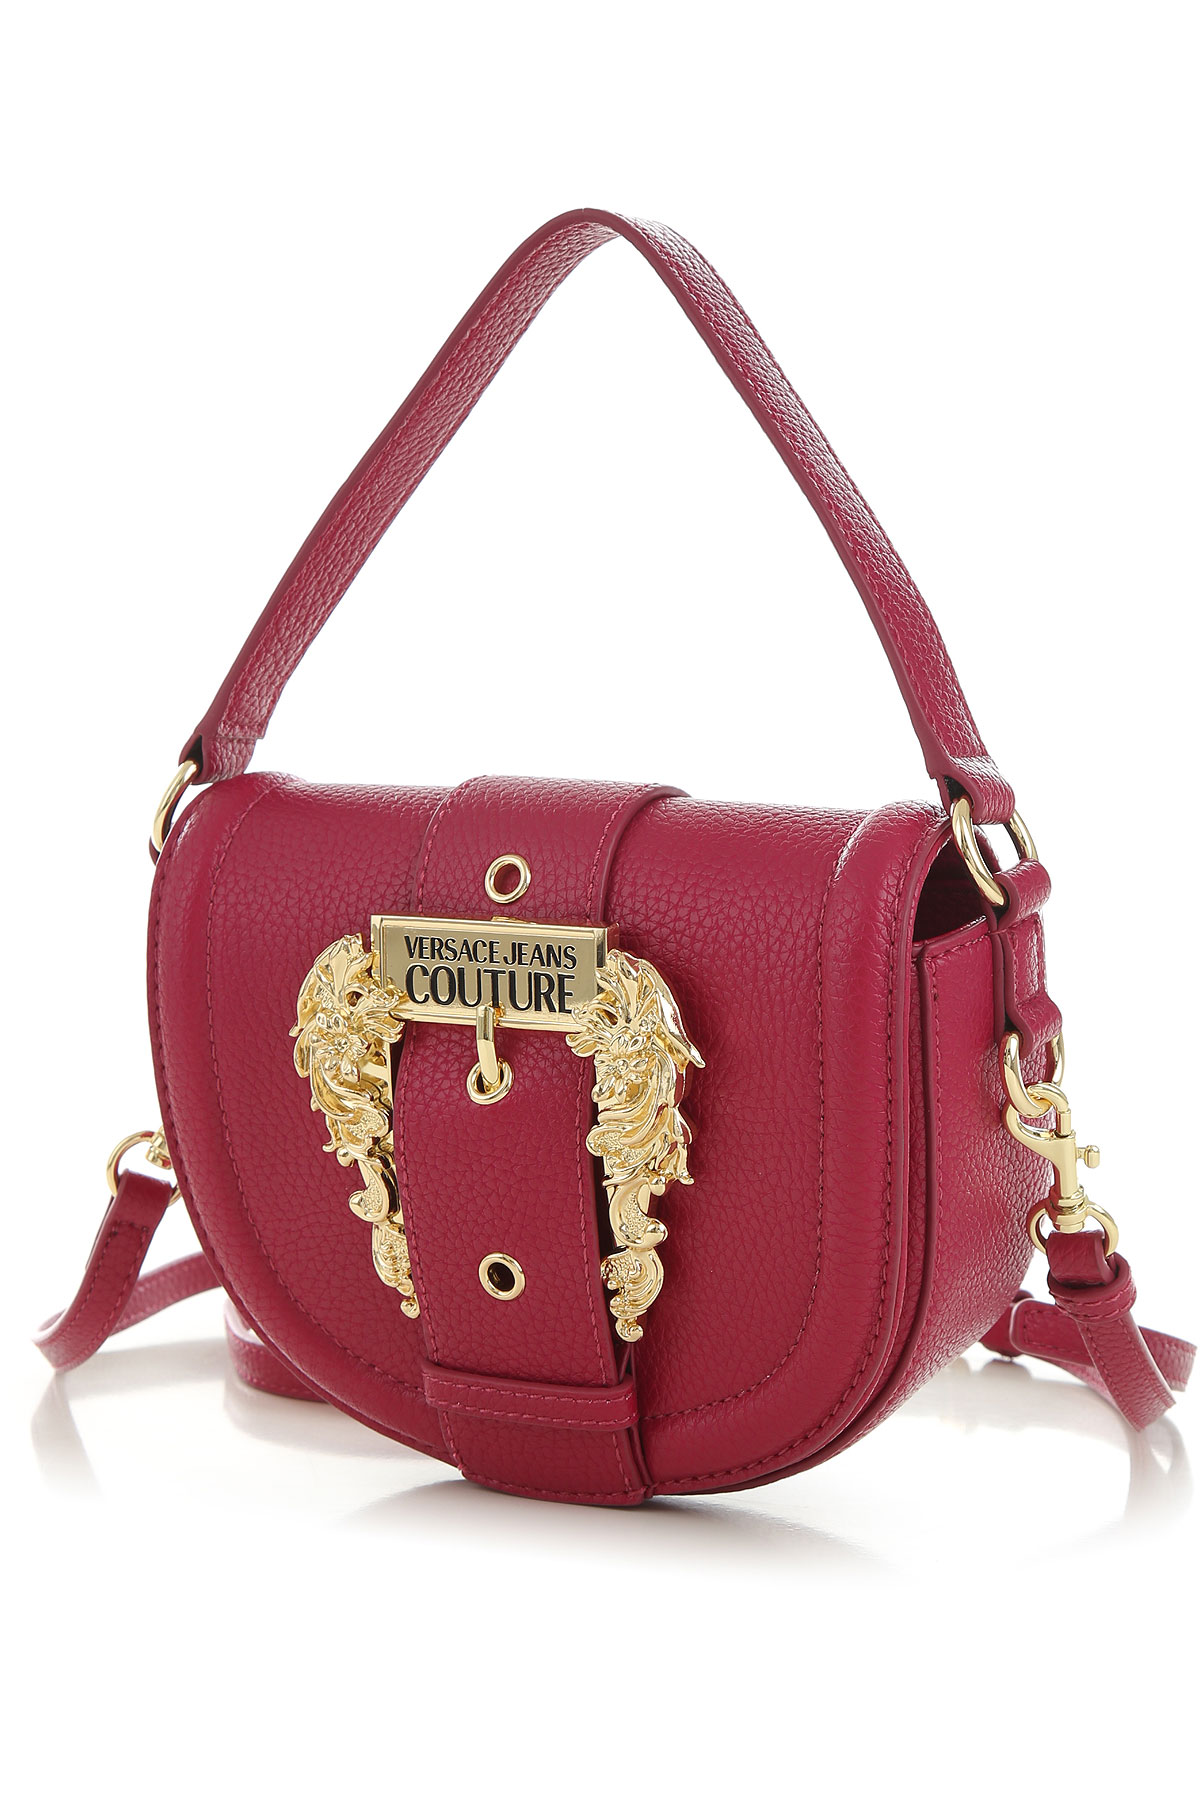 Handbags Versace Jeans Couture , Style code: 73va4bf6-zs414-416